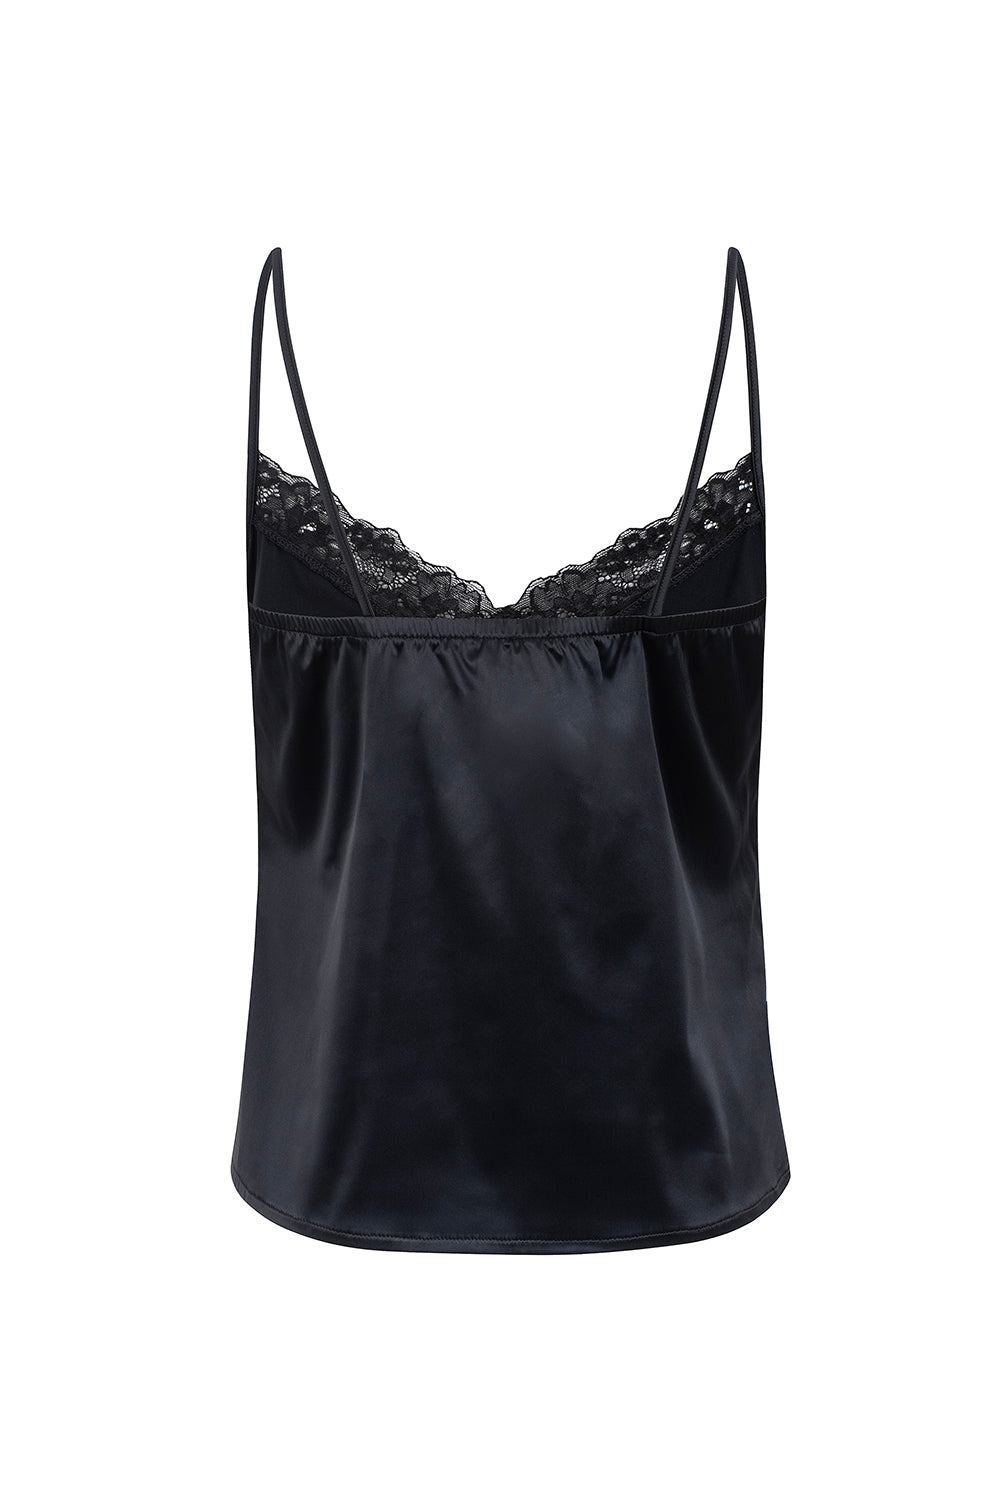 BLACK SATIN & LACE TOP (OUT OF STOCK)